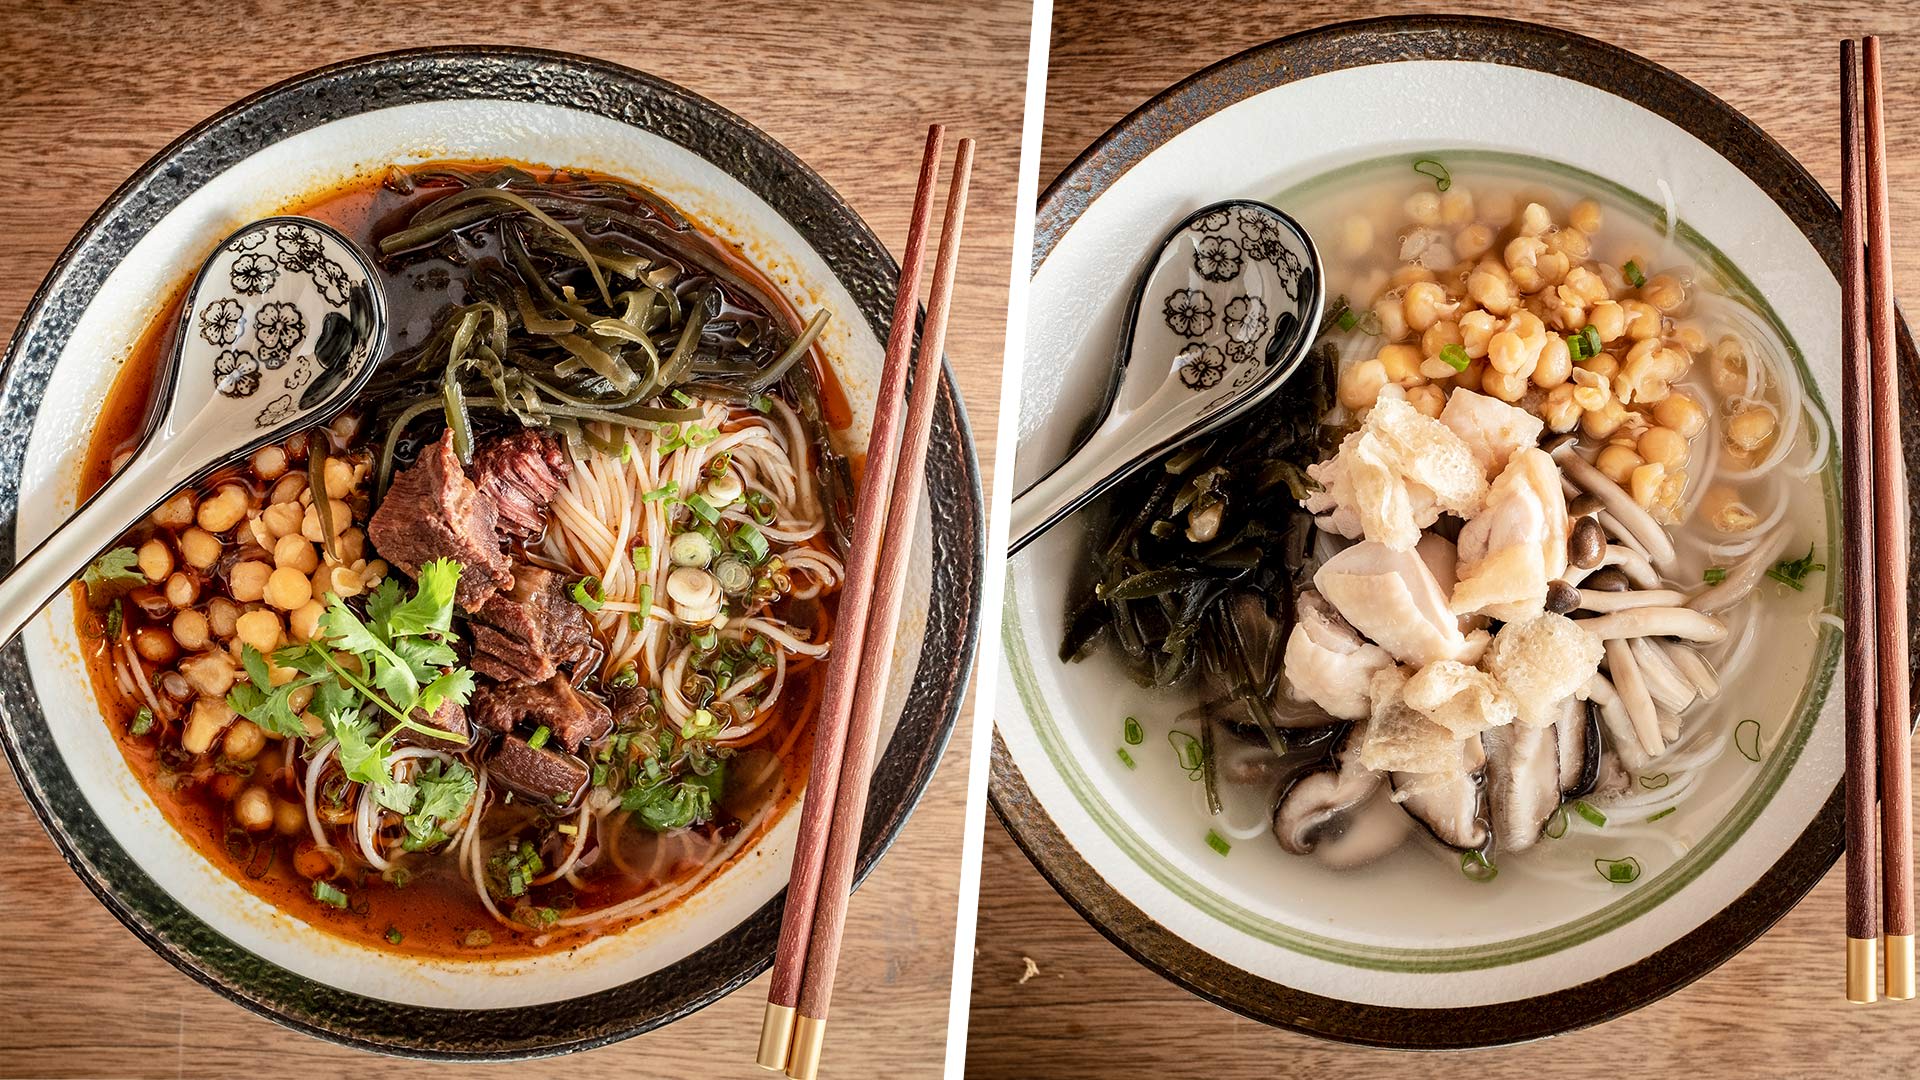 These Silky Sichuan Noodles Said To Be Famed Chinese Warlord Liu Bei’s Fave 1,800 Years Ago